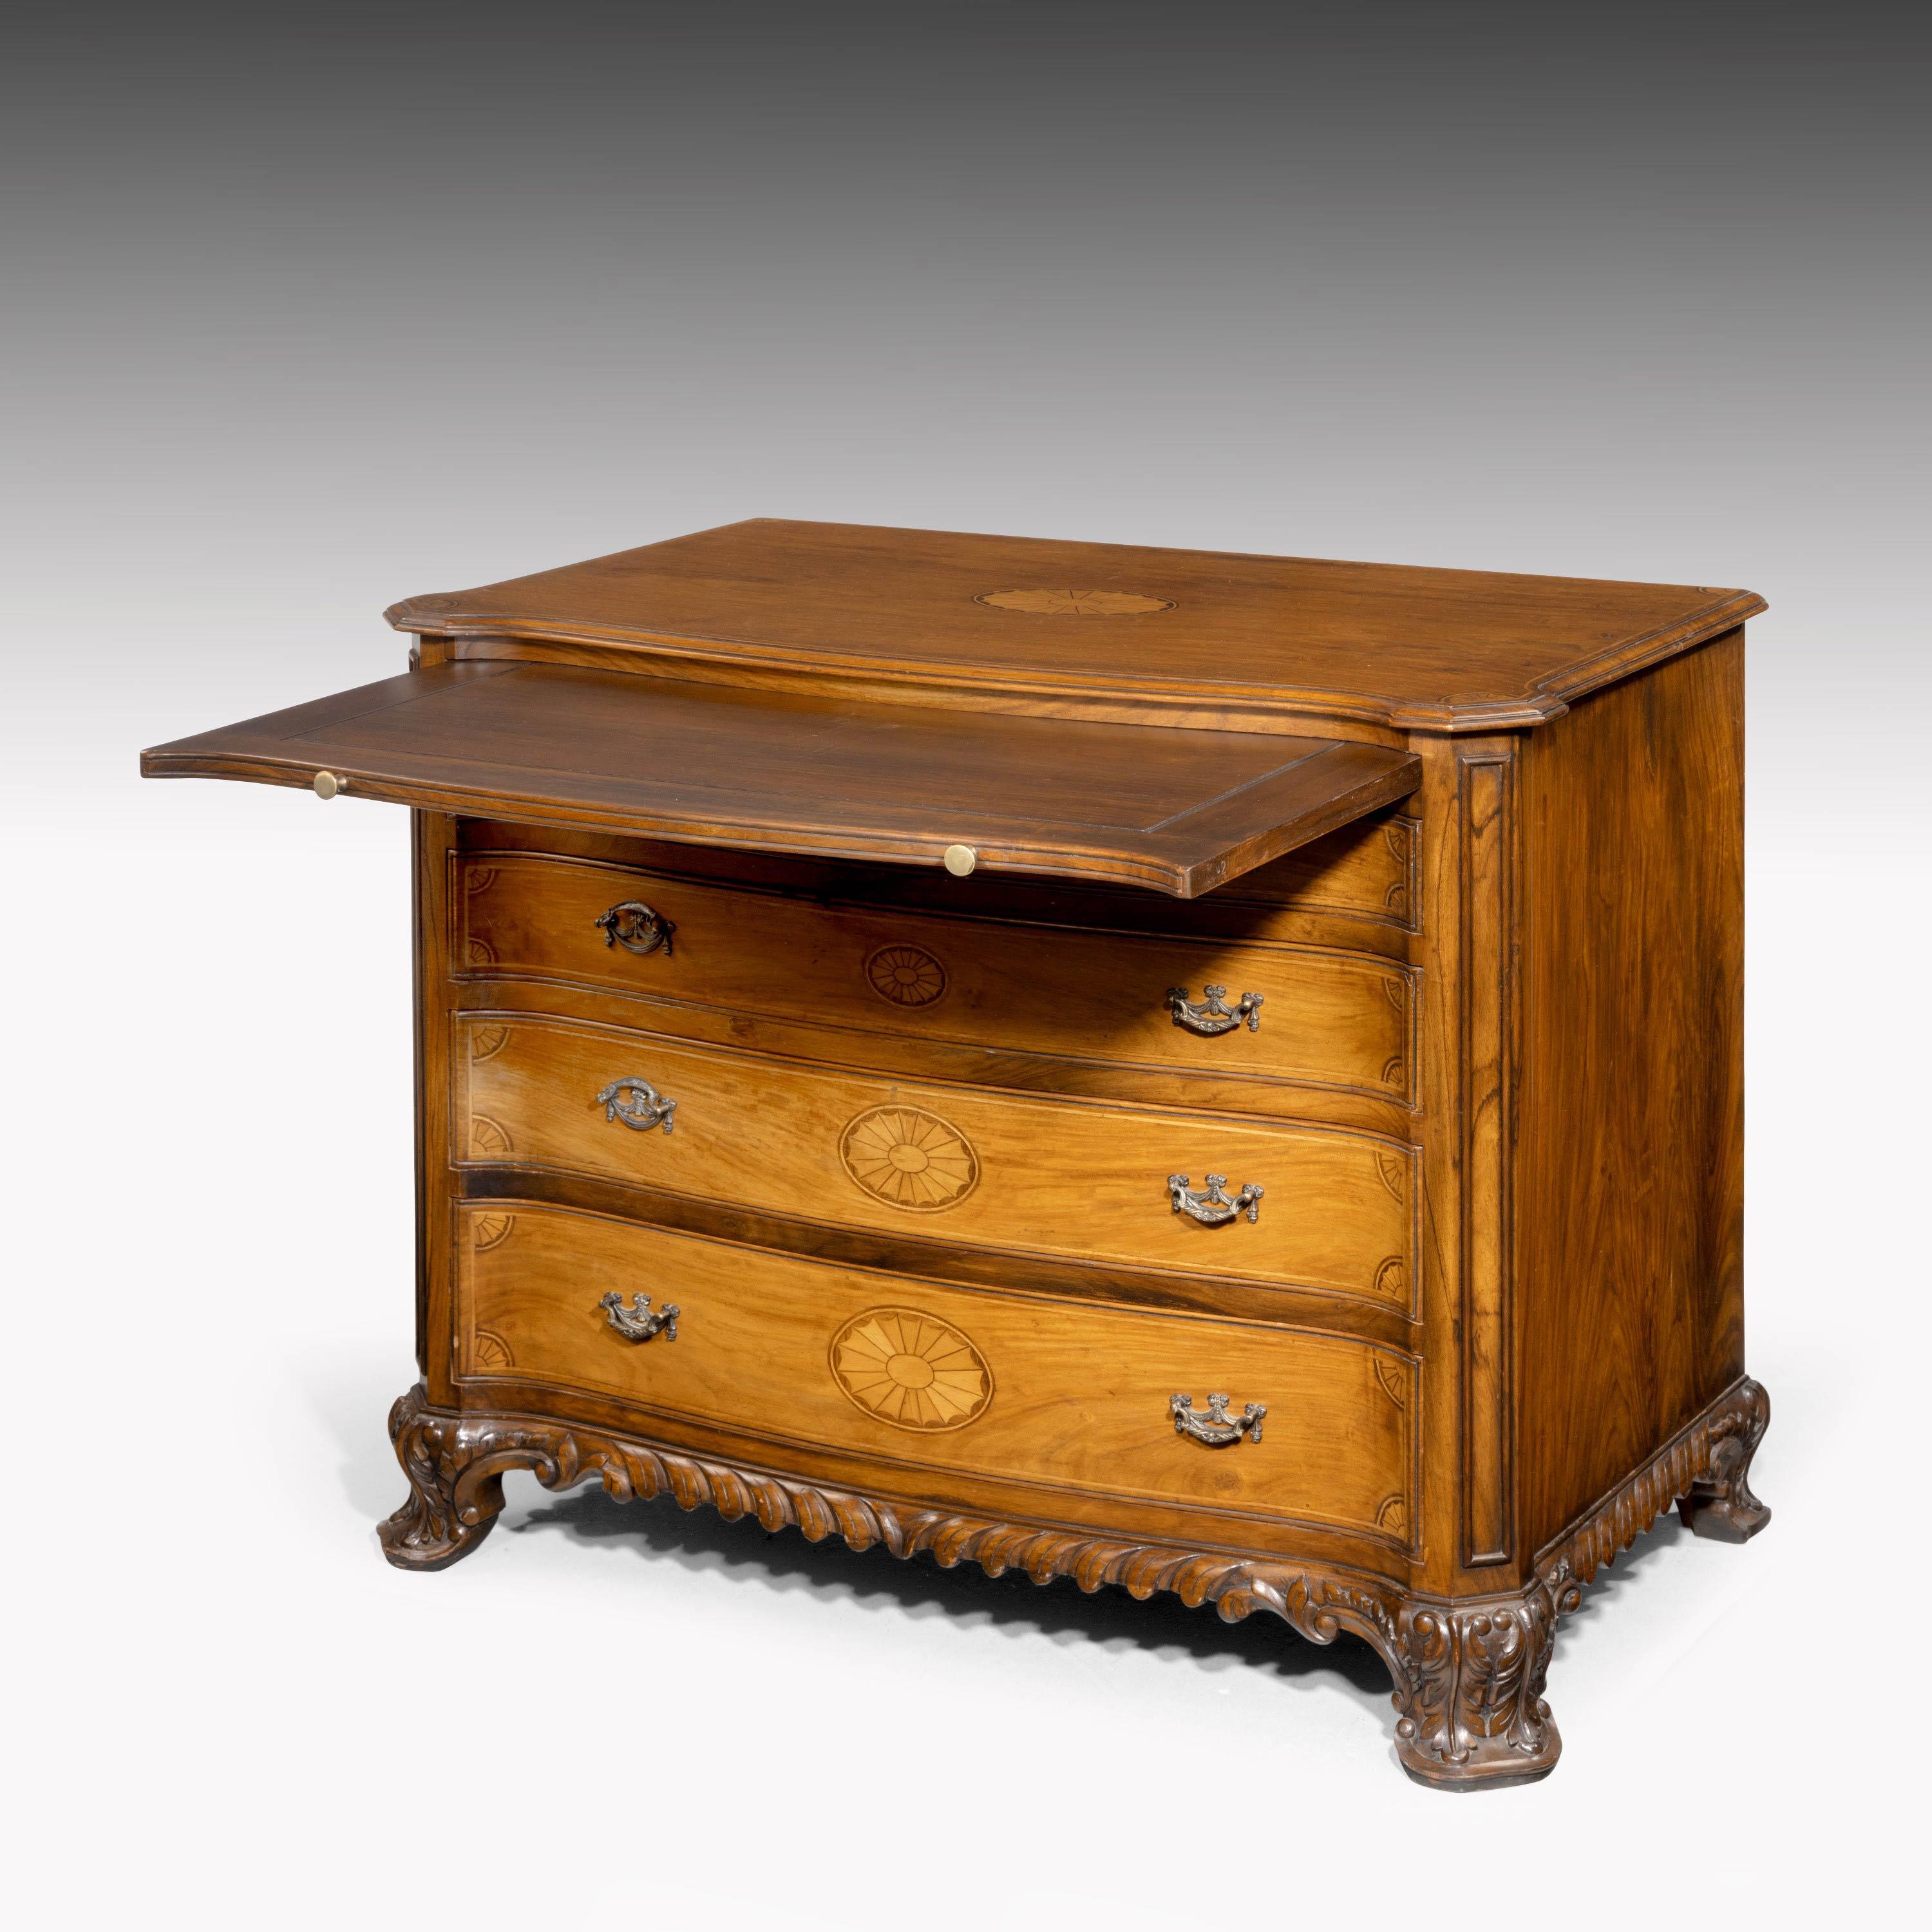 A quite exceptional serpentine fronted mahogany commode of the finest quality. With canted corners and sunburst inlays to the top and the drawer fronts. Original cast gilt bronze handles and incorporating a dressing slide. The bottom mold